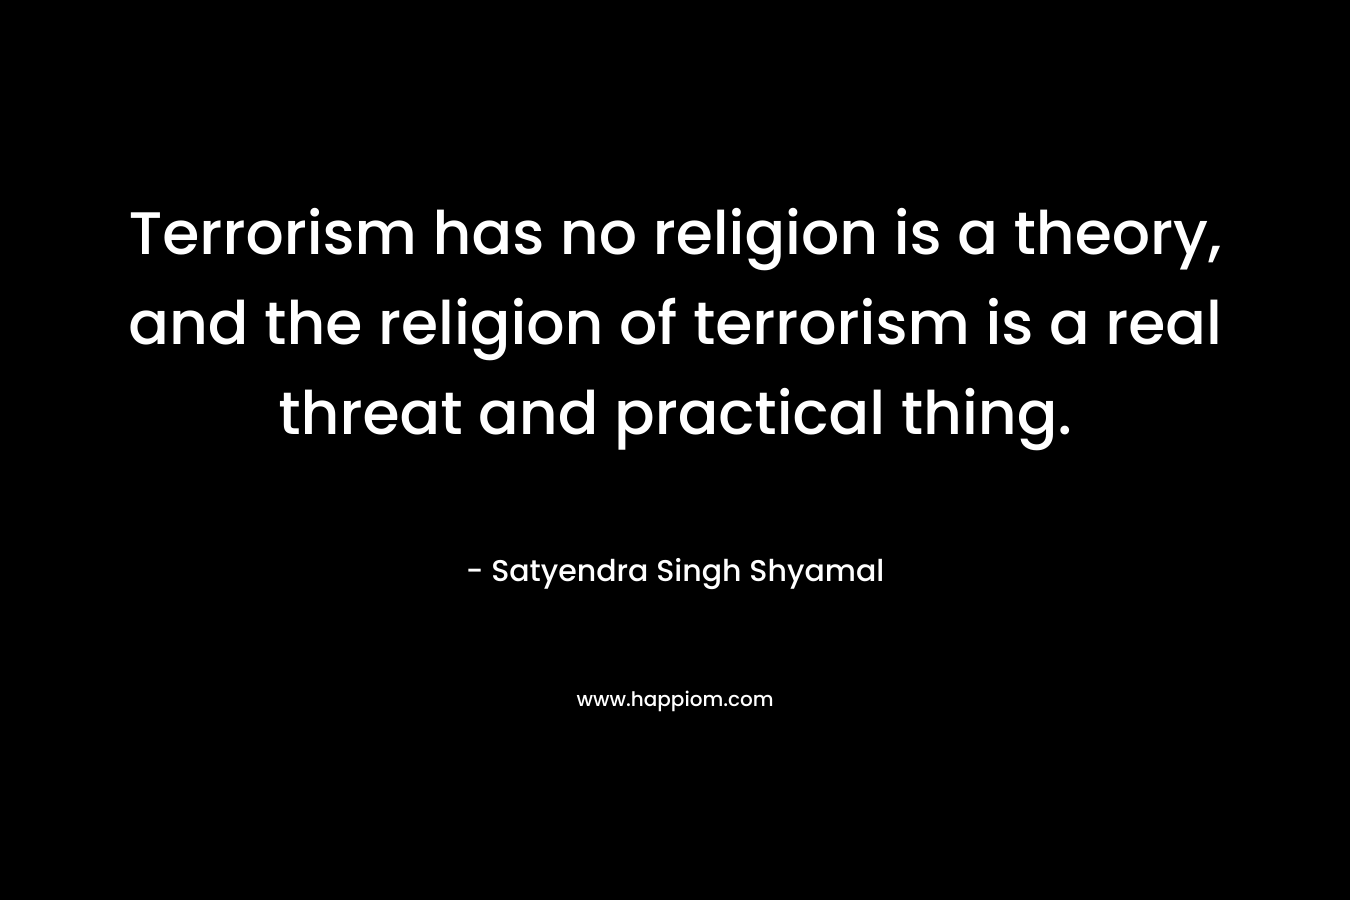 Terrorism has no religion is a theory, and the religion of terrorism is a real threat and practical thing.